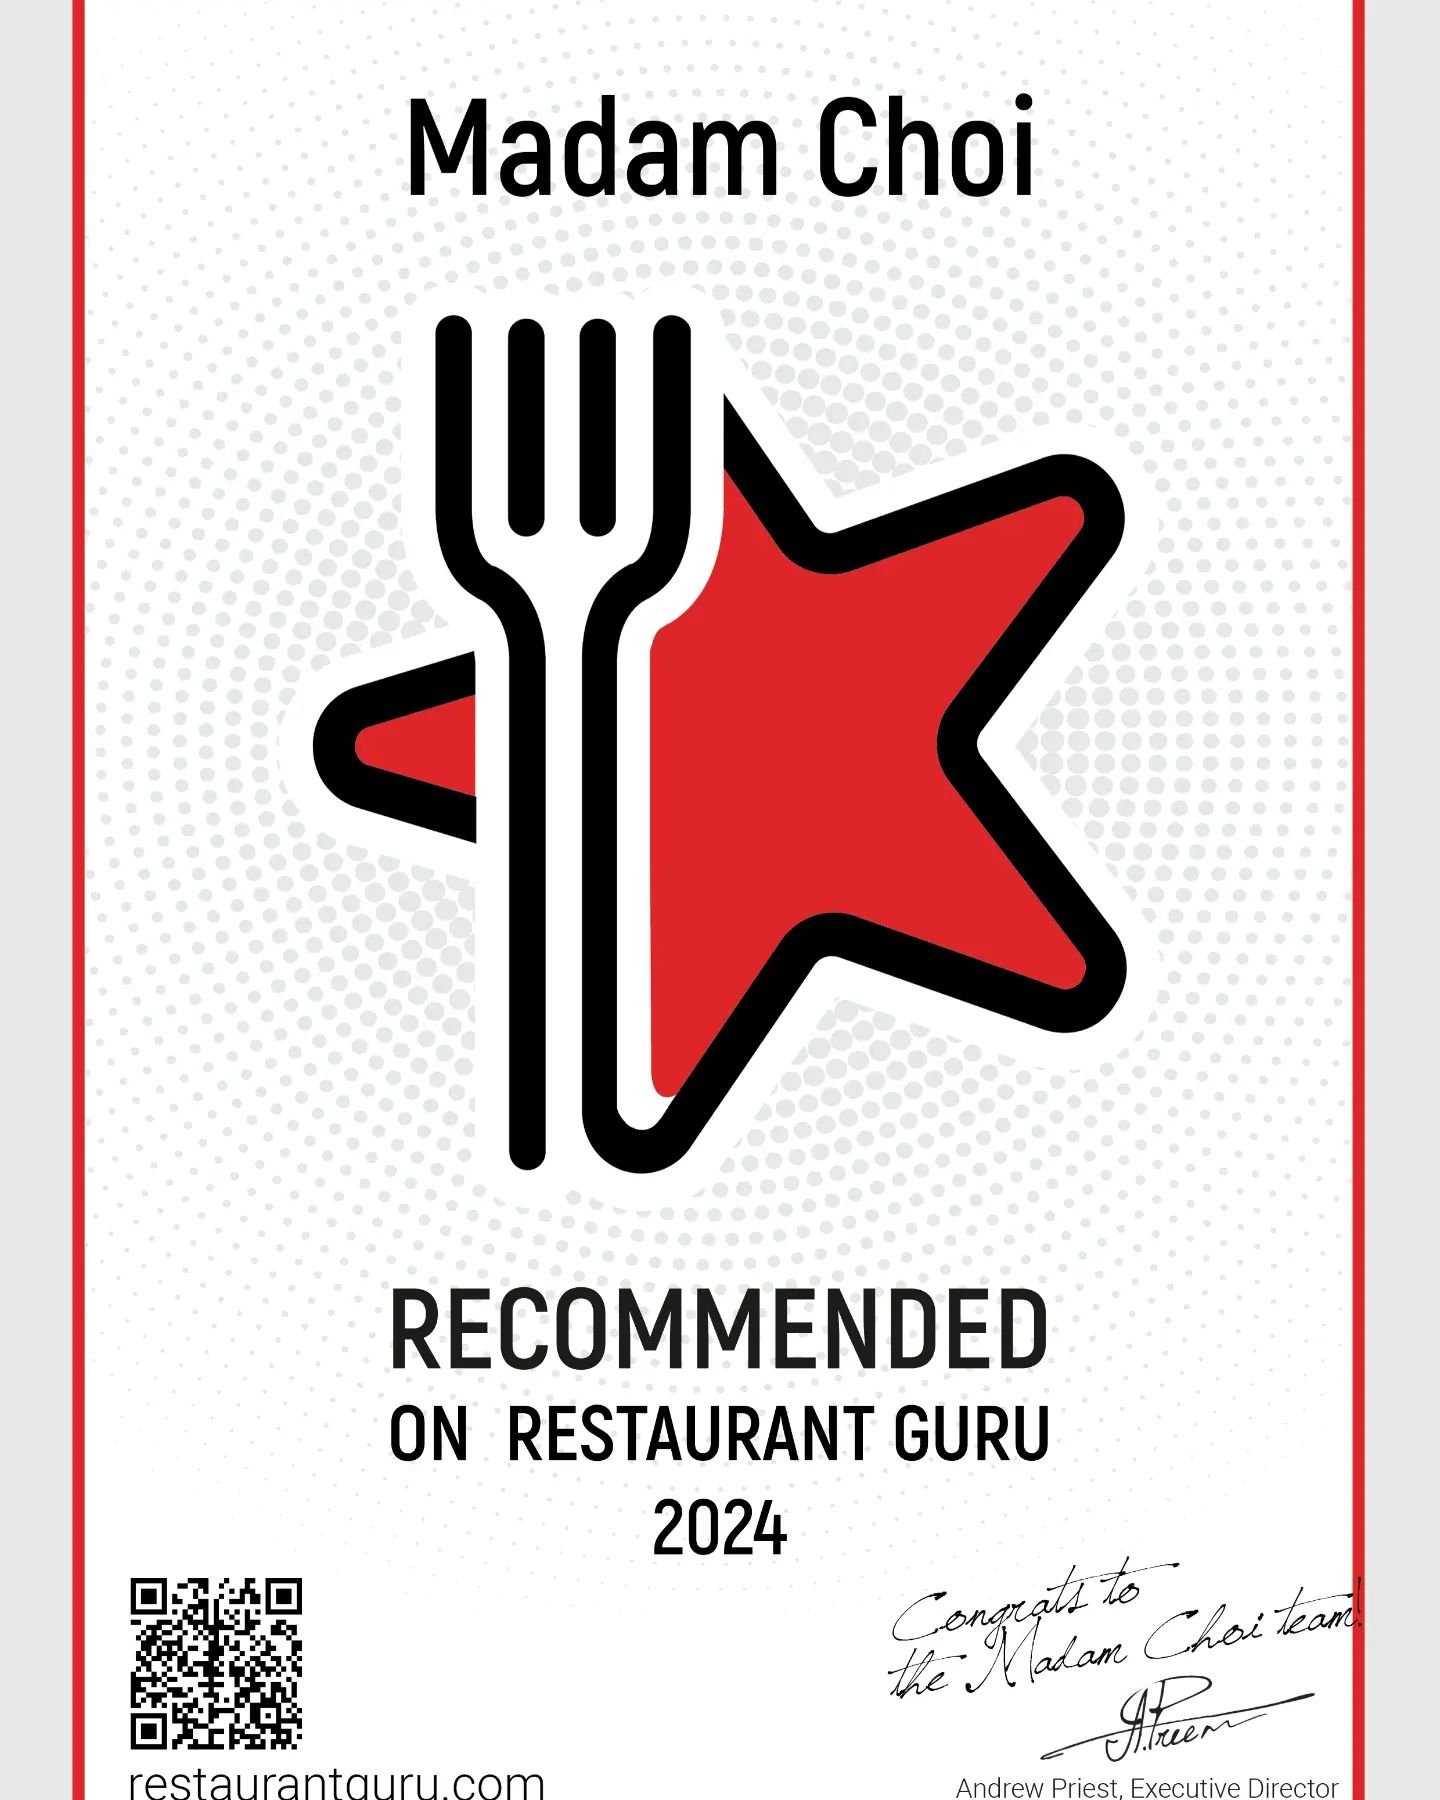 We are delighted to share Madam Choi has been awarded a Recommendation by #restaurantguru in 2024. Thank you! 😄